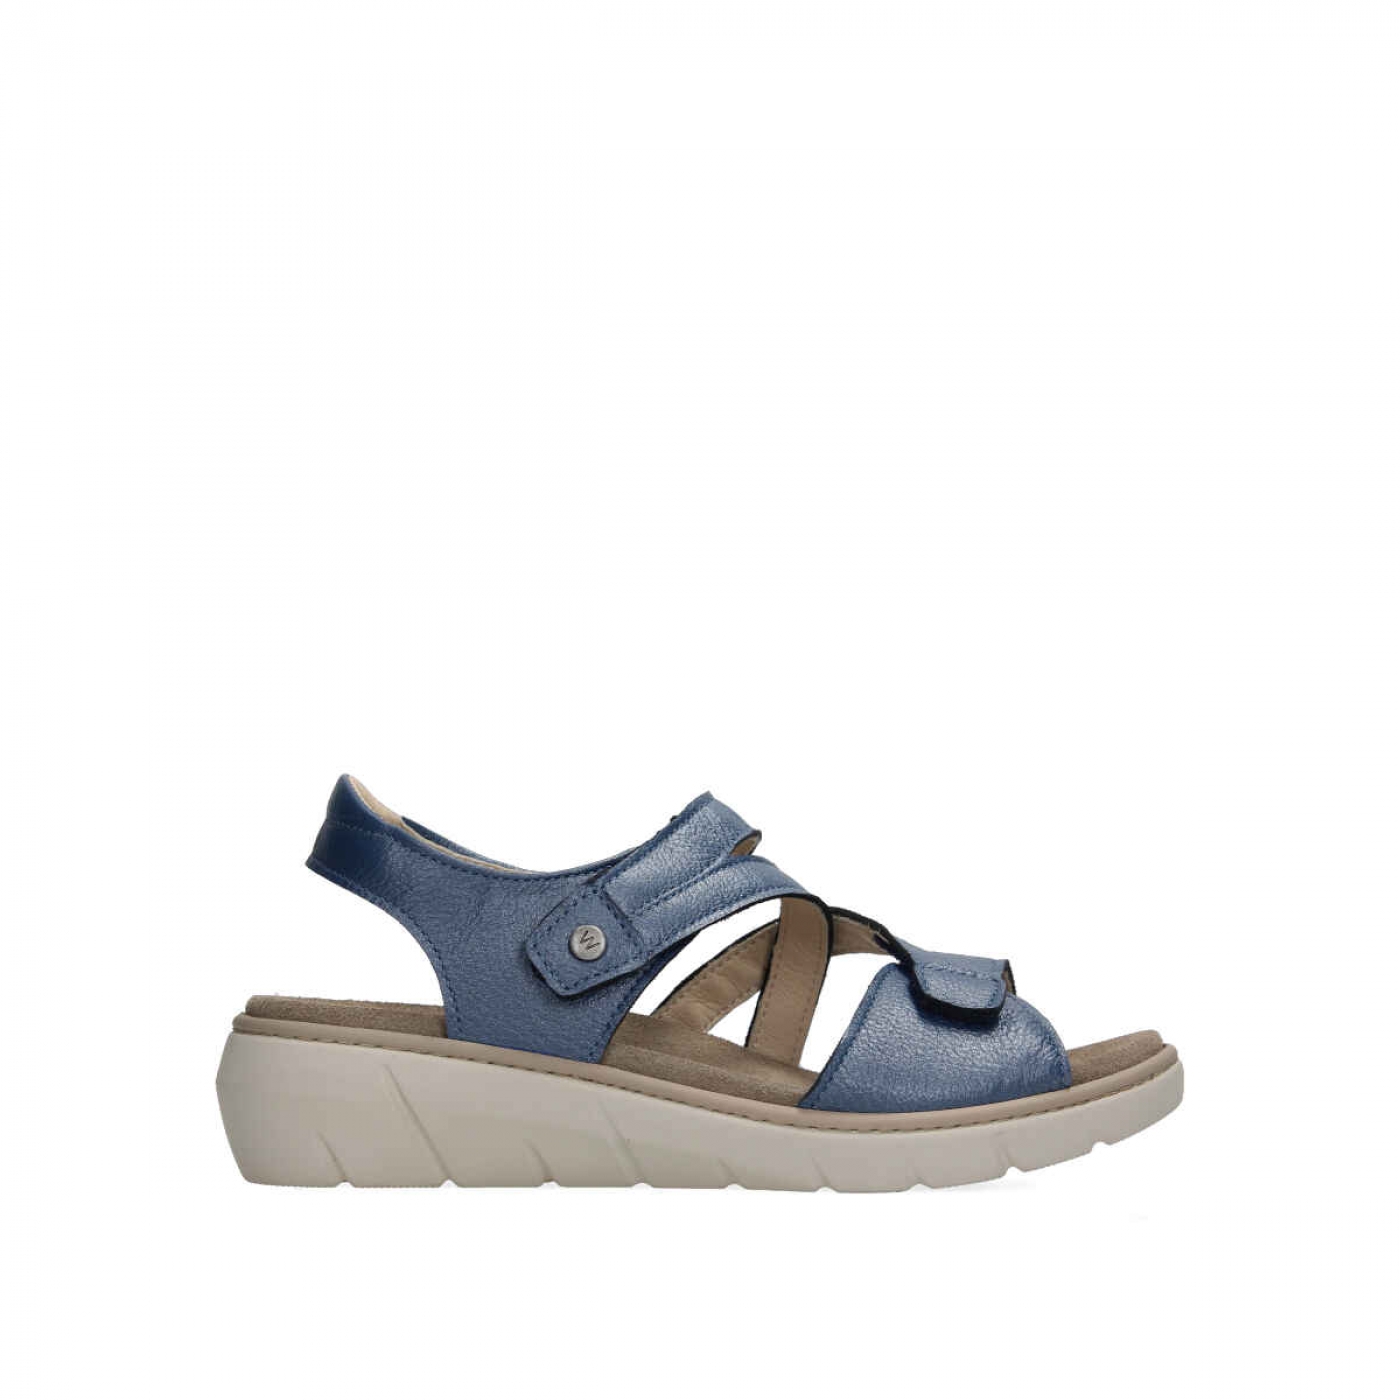 Wolky Shoes 04106 Ikaria blue leather order now! Biggest Wolky ...